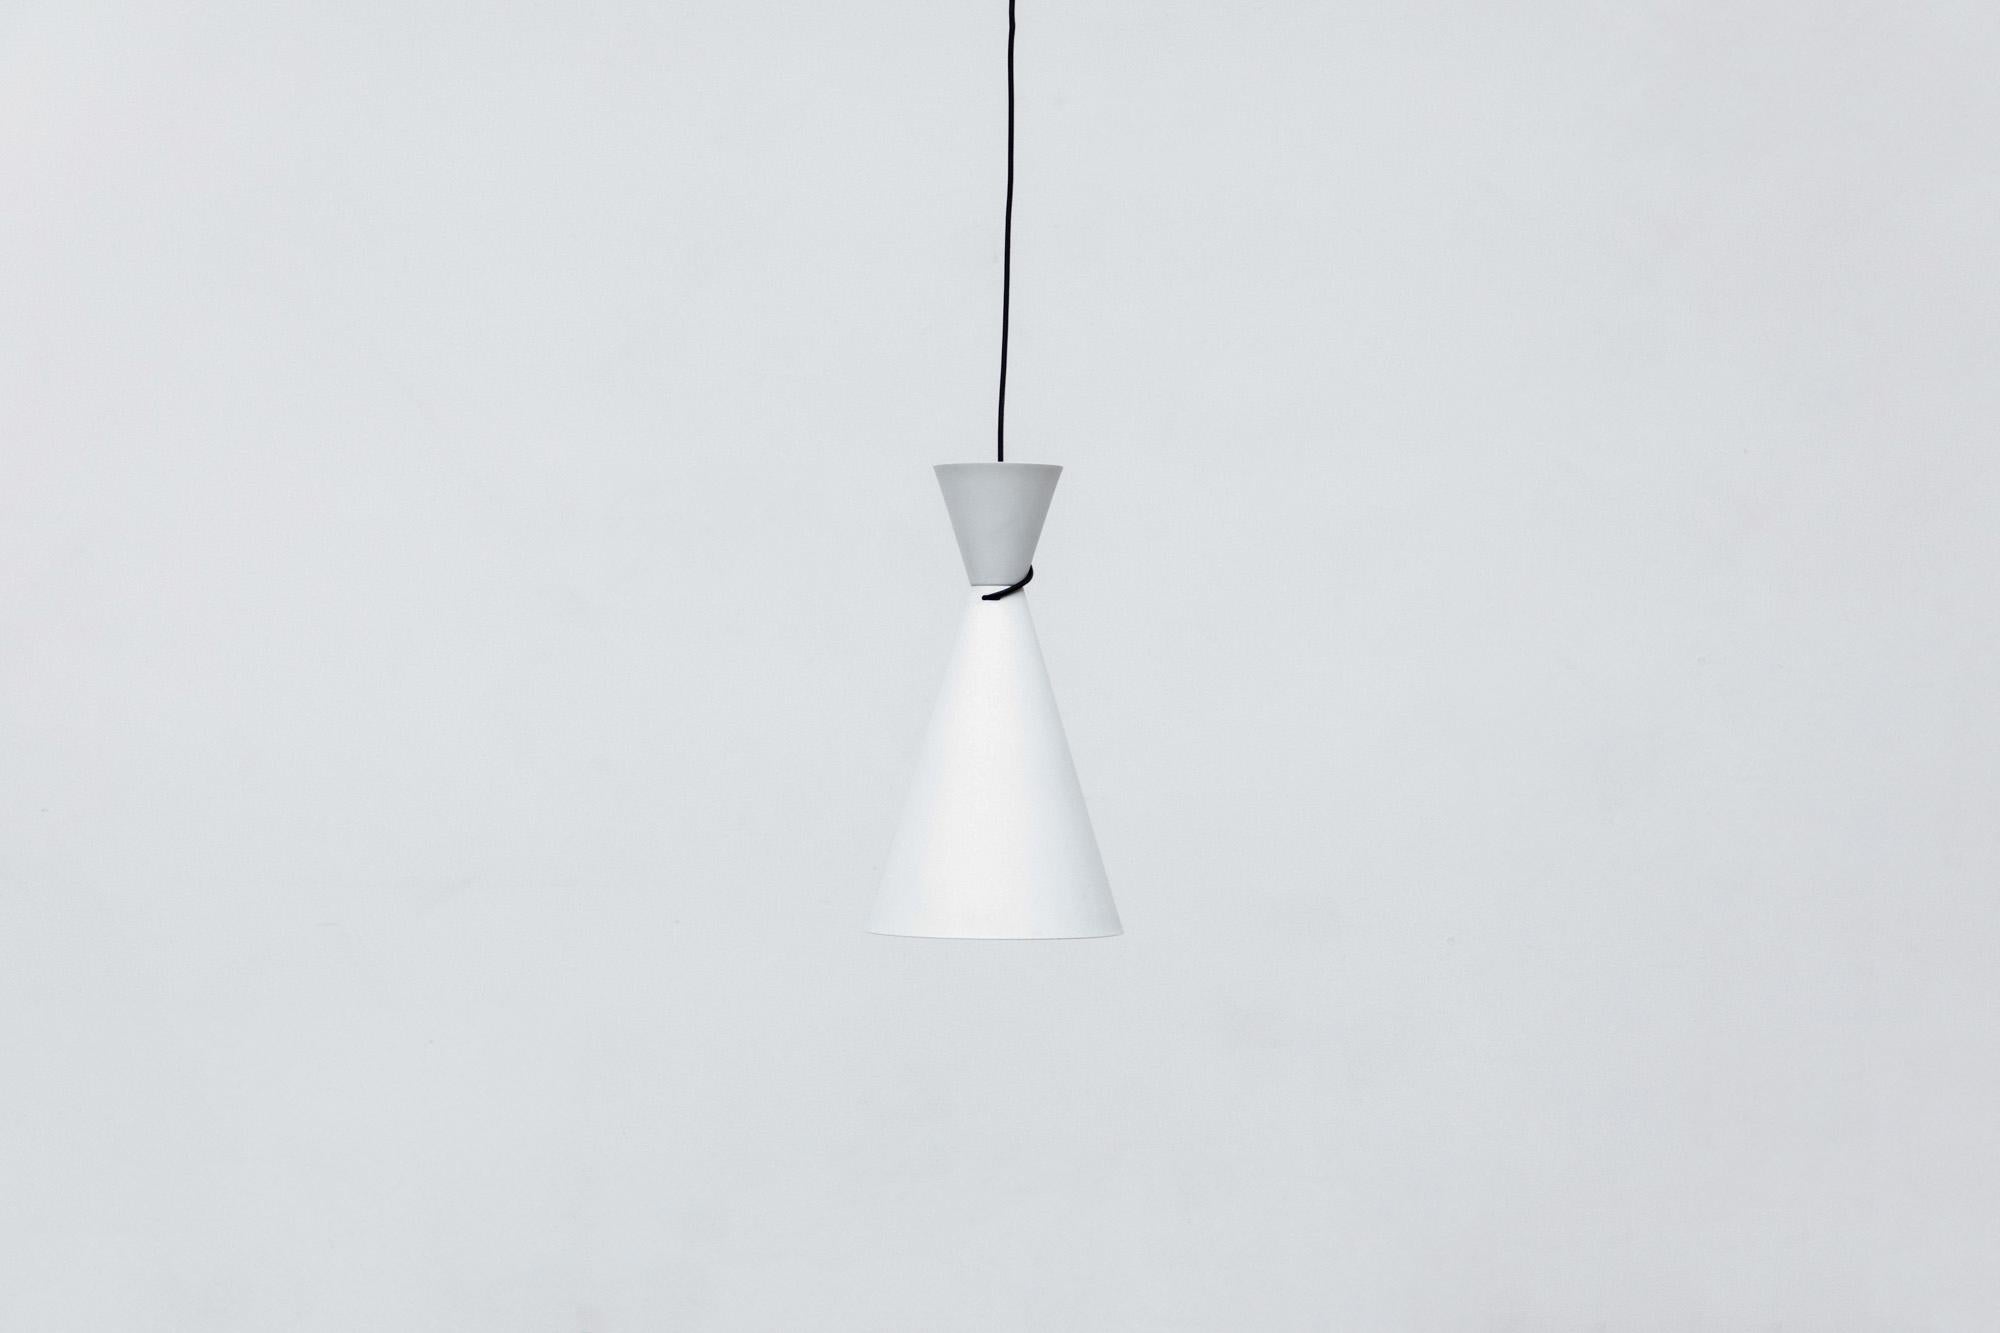 'Diablo' style white enameled metal pendant lamp with black cloth wrap around cord. In good original condition, with minimal wear consistent with age and use.